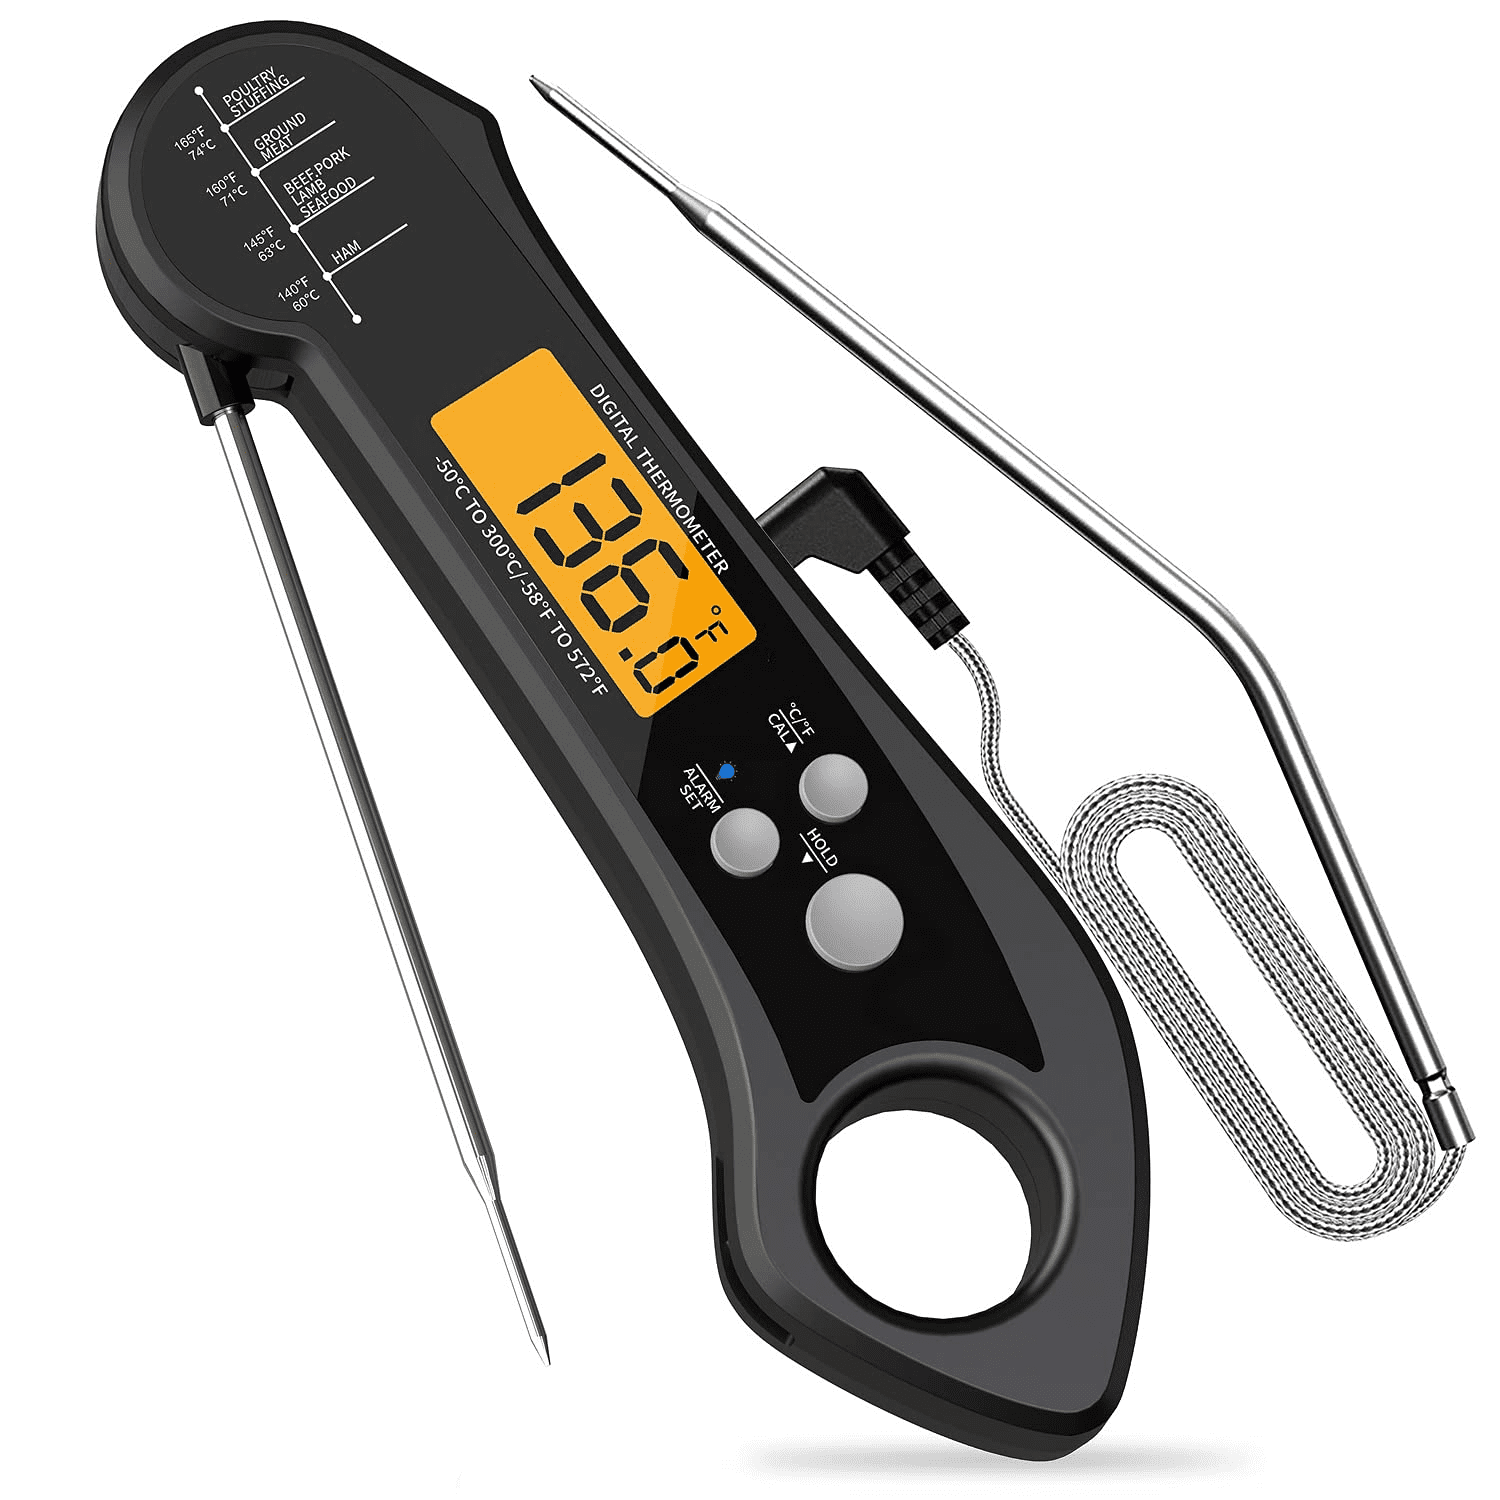 F74 digital food pen Thermometer Kitchen BBQ Meat Cooking Temperature 